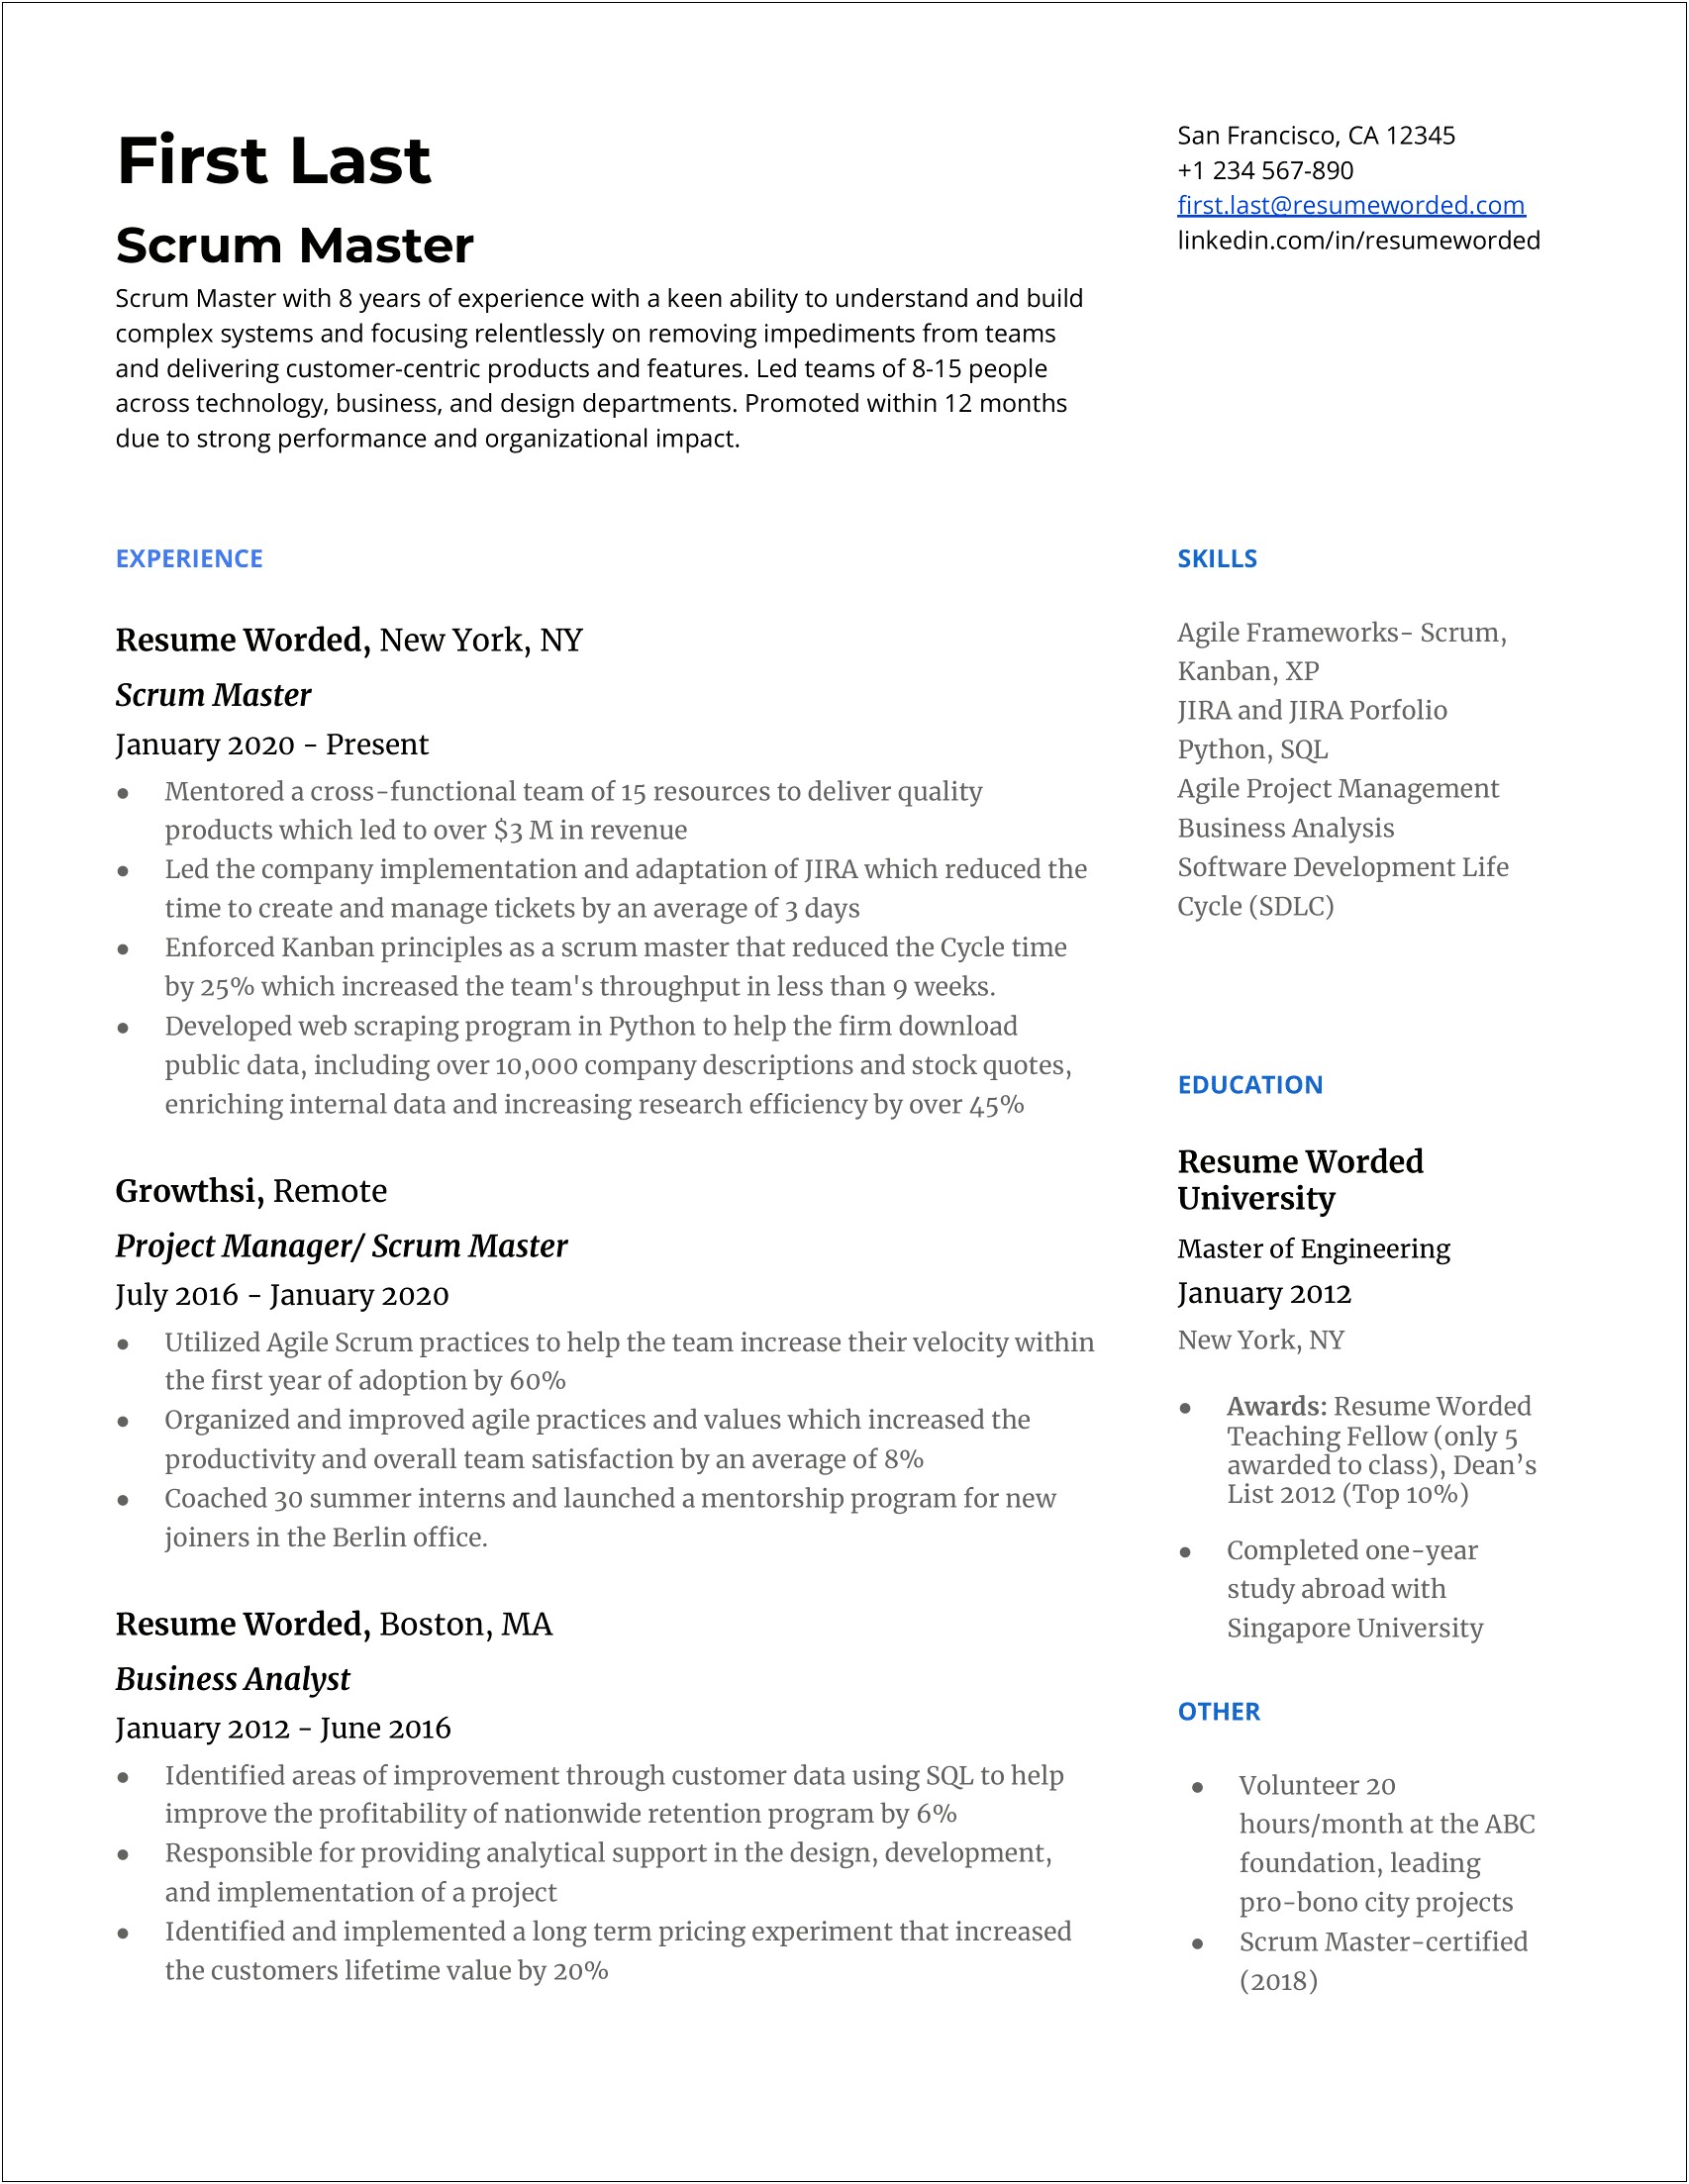 Sample Resume Awards And Achievements